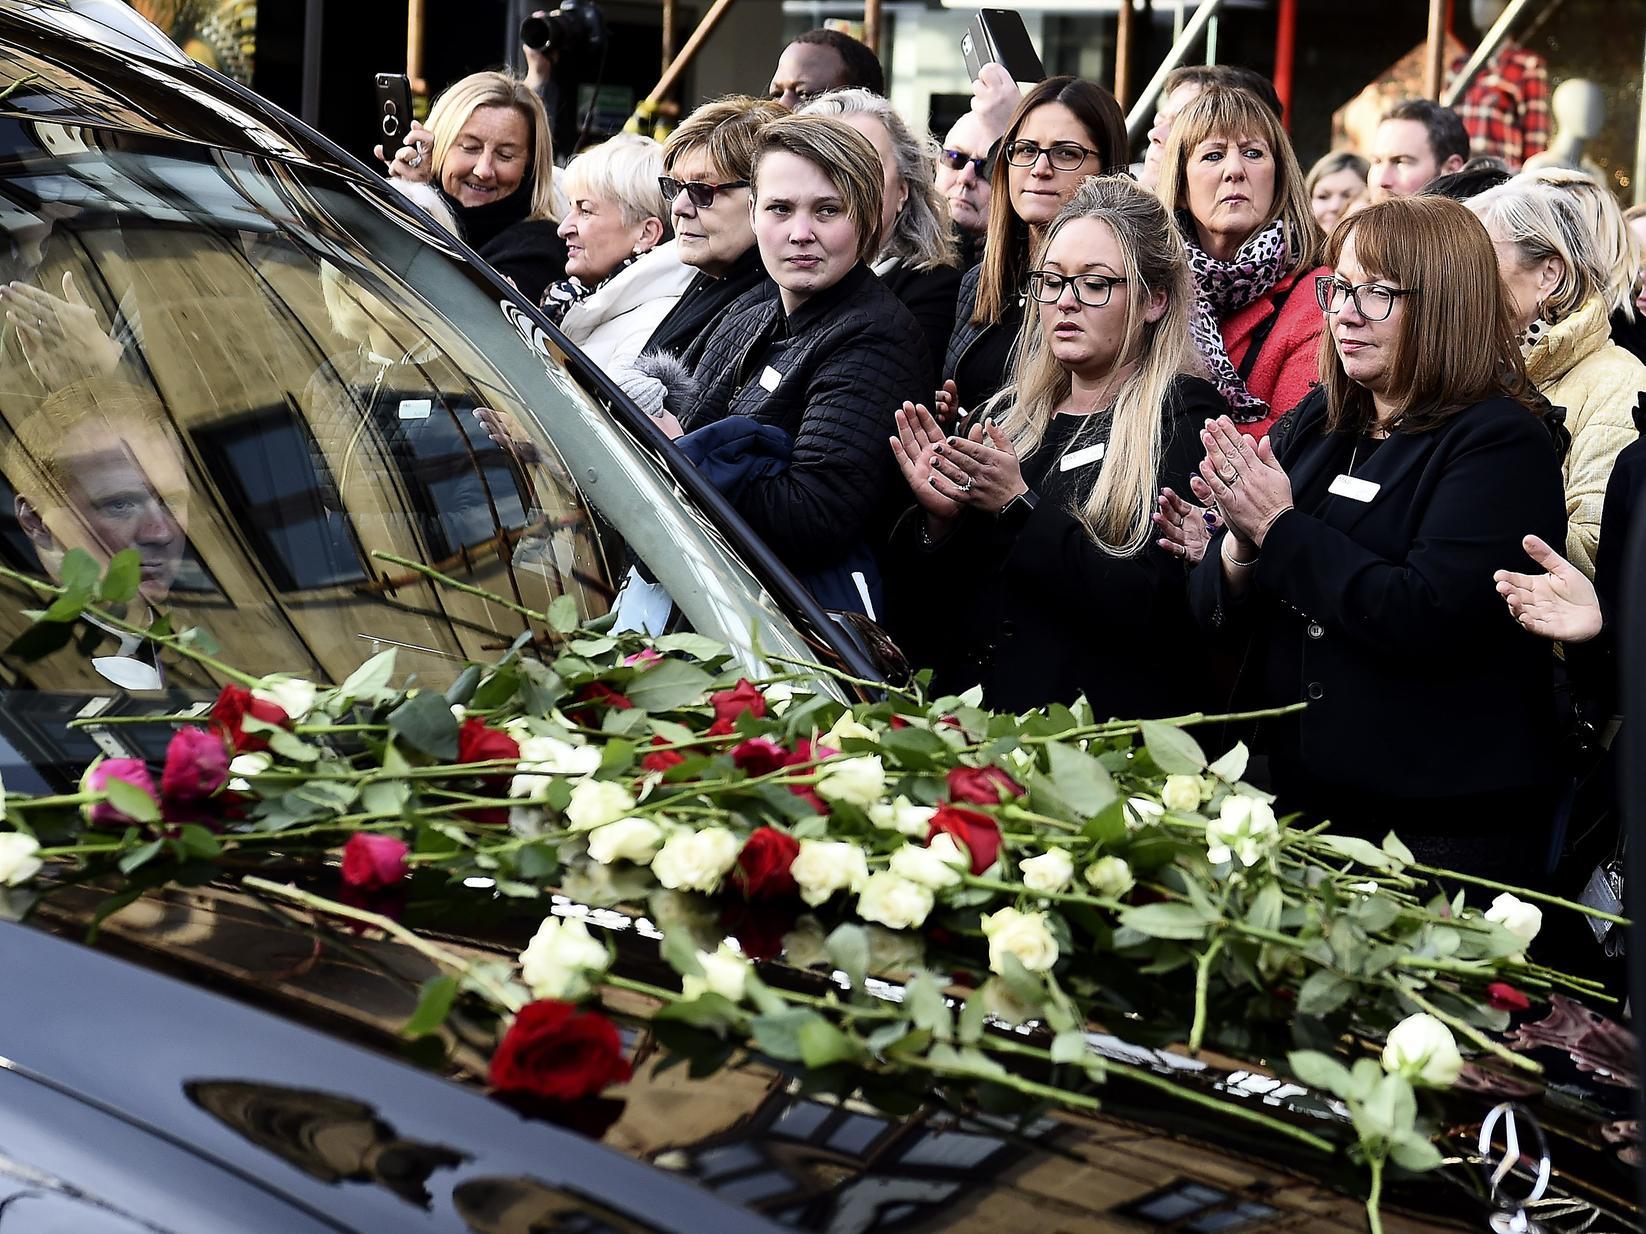 Mourners applauded while many placed roses on the front of the hearse.